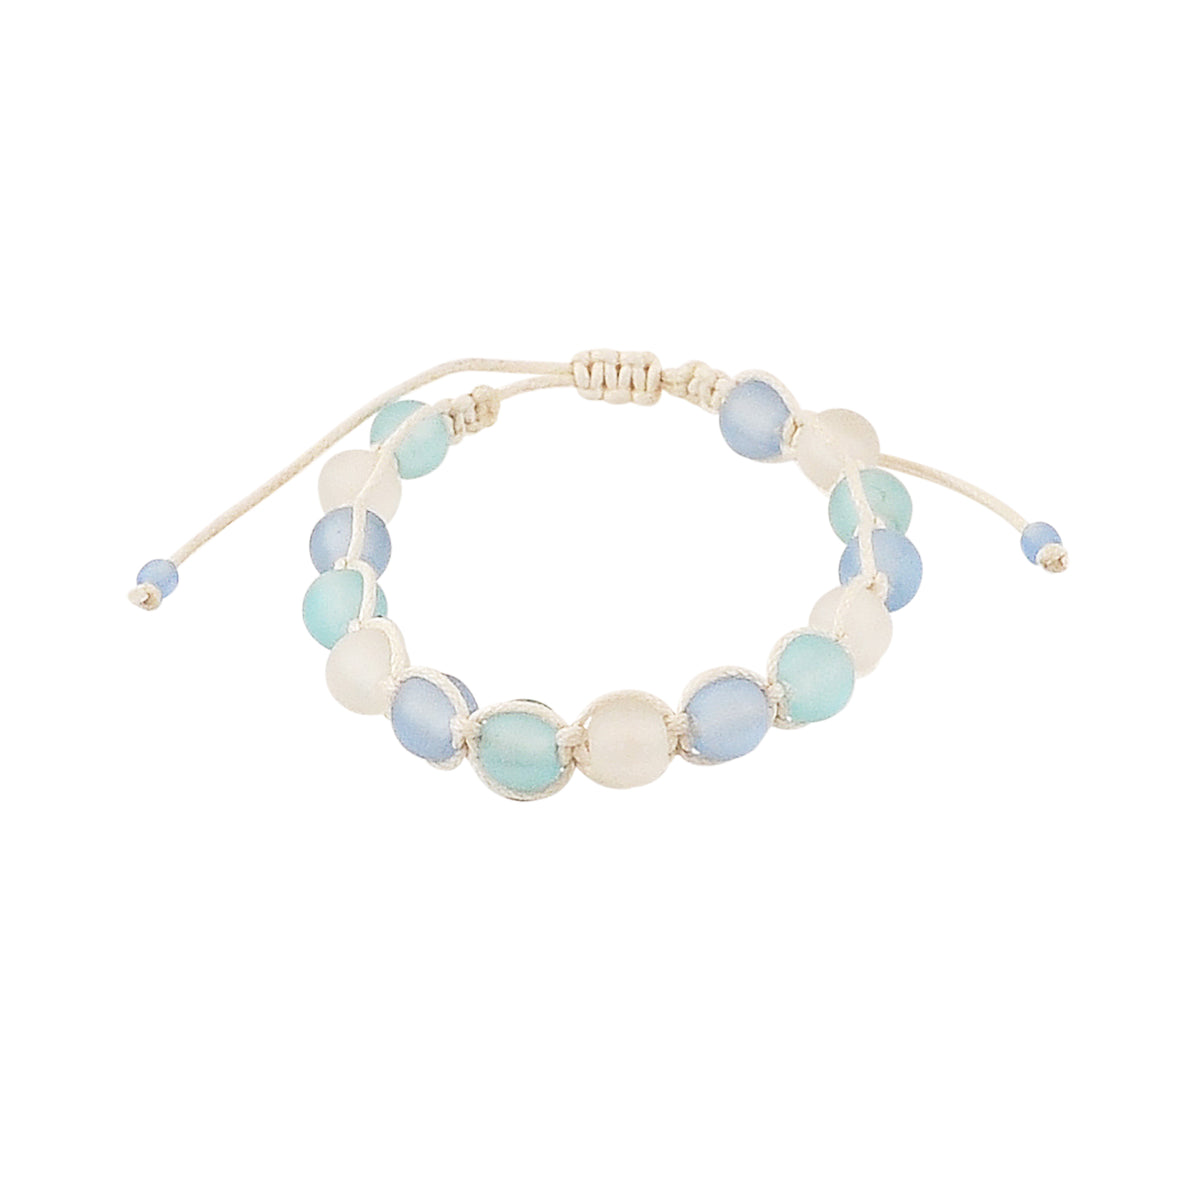 Multi-Colored Frosted Glass Bead String Bracelet - Viva life Jewellery